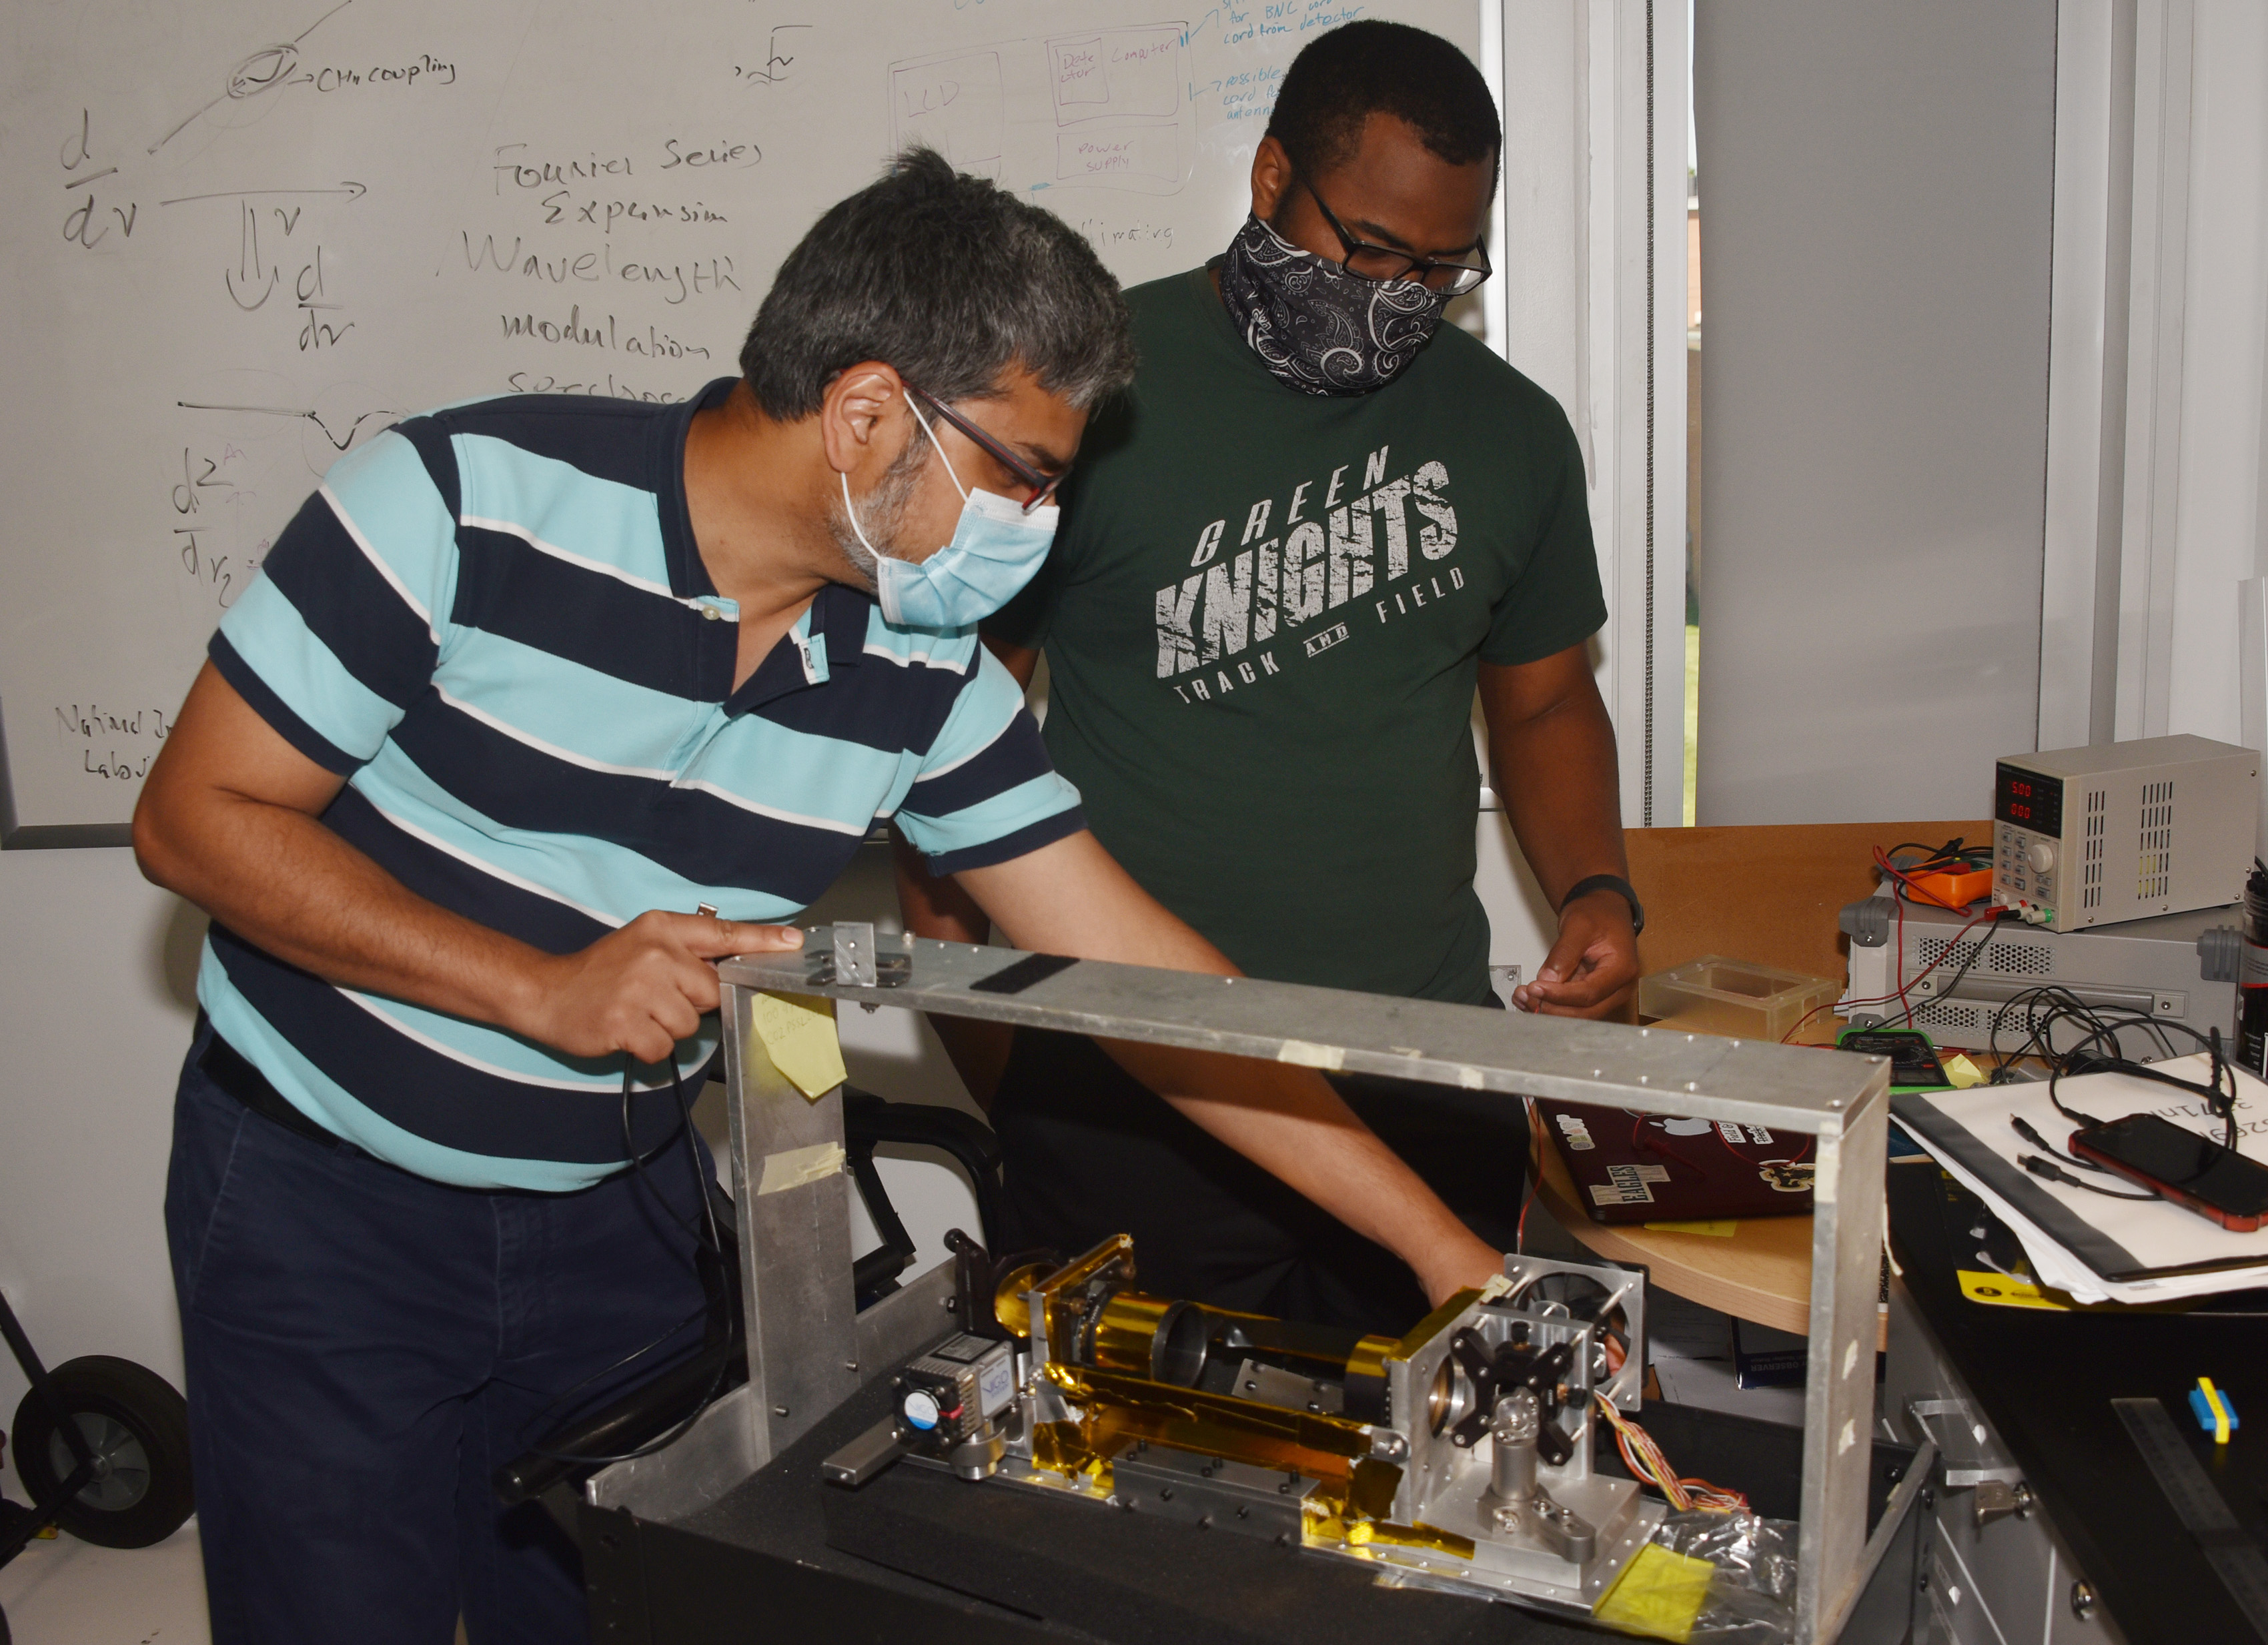 Dr. Amir Khan shares knowledge with Andrew Horne, a engineering undergraduate.